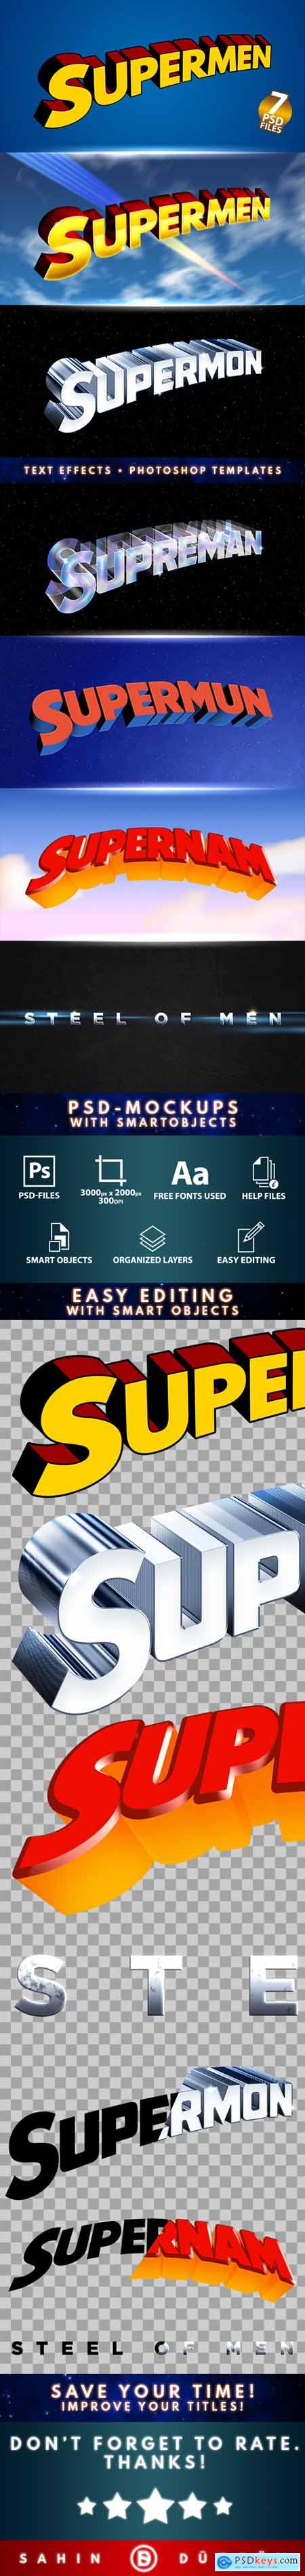 SUPERMEN - Text-Effects-Mockups - Template-Package 28266705